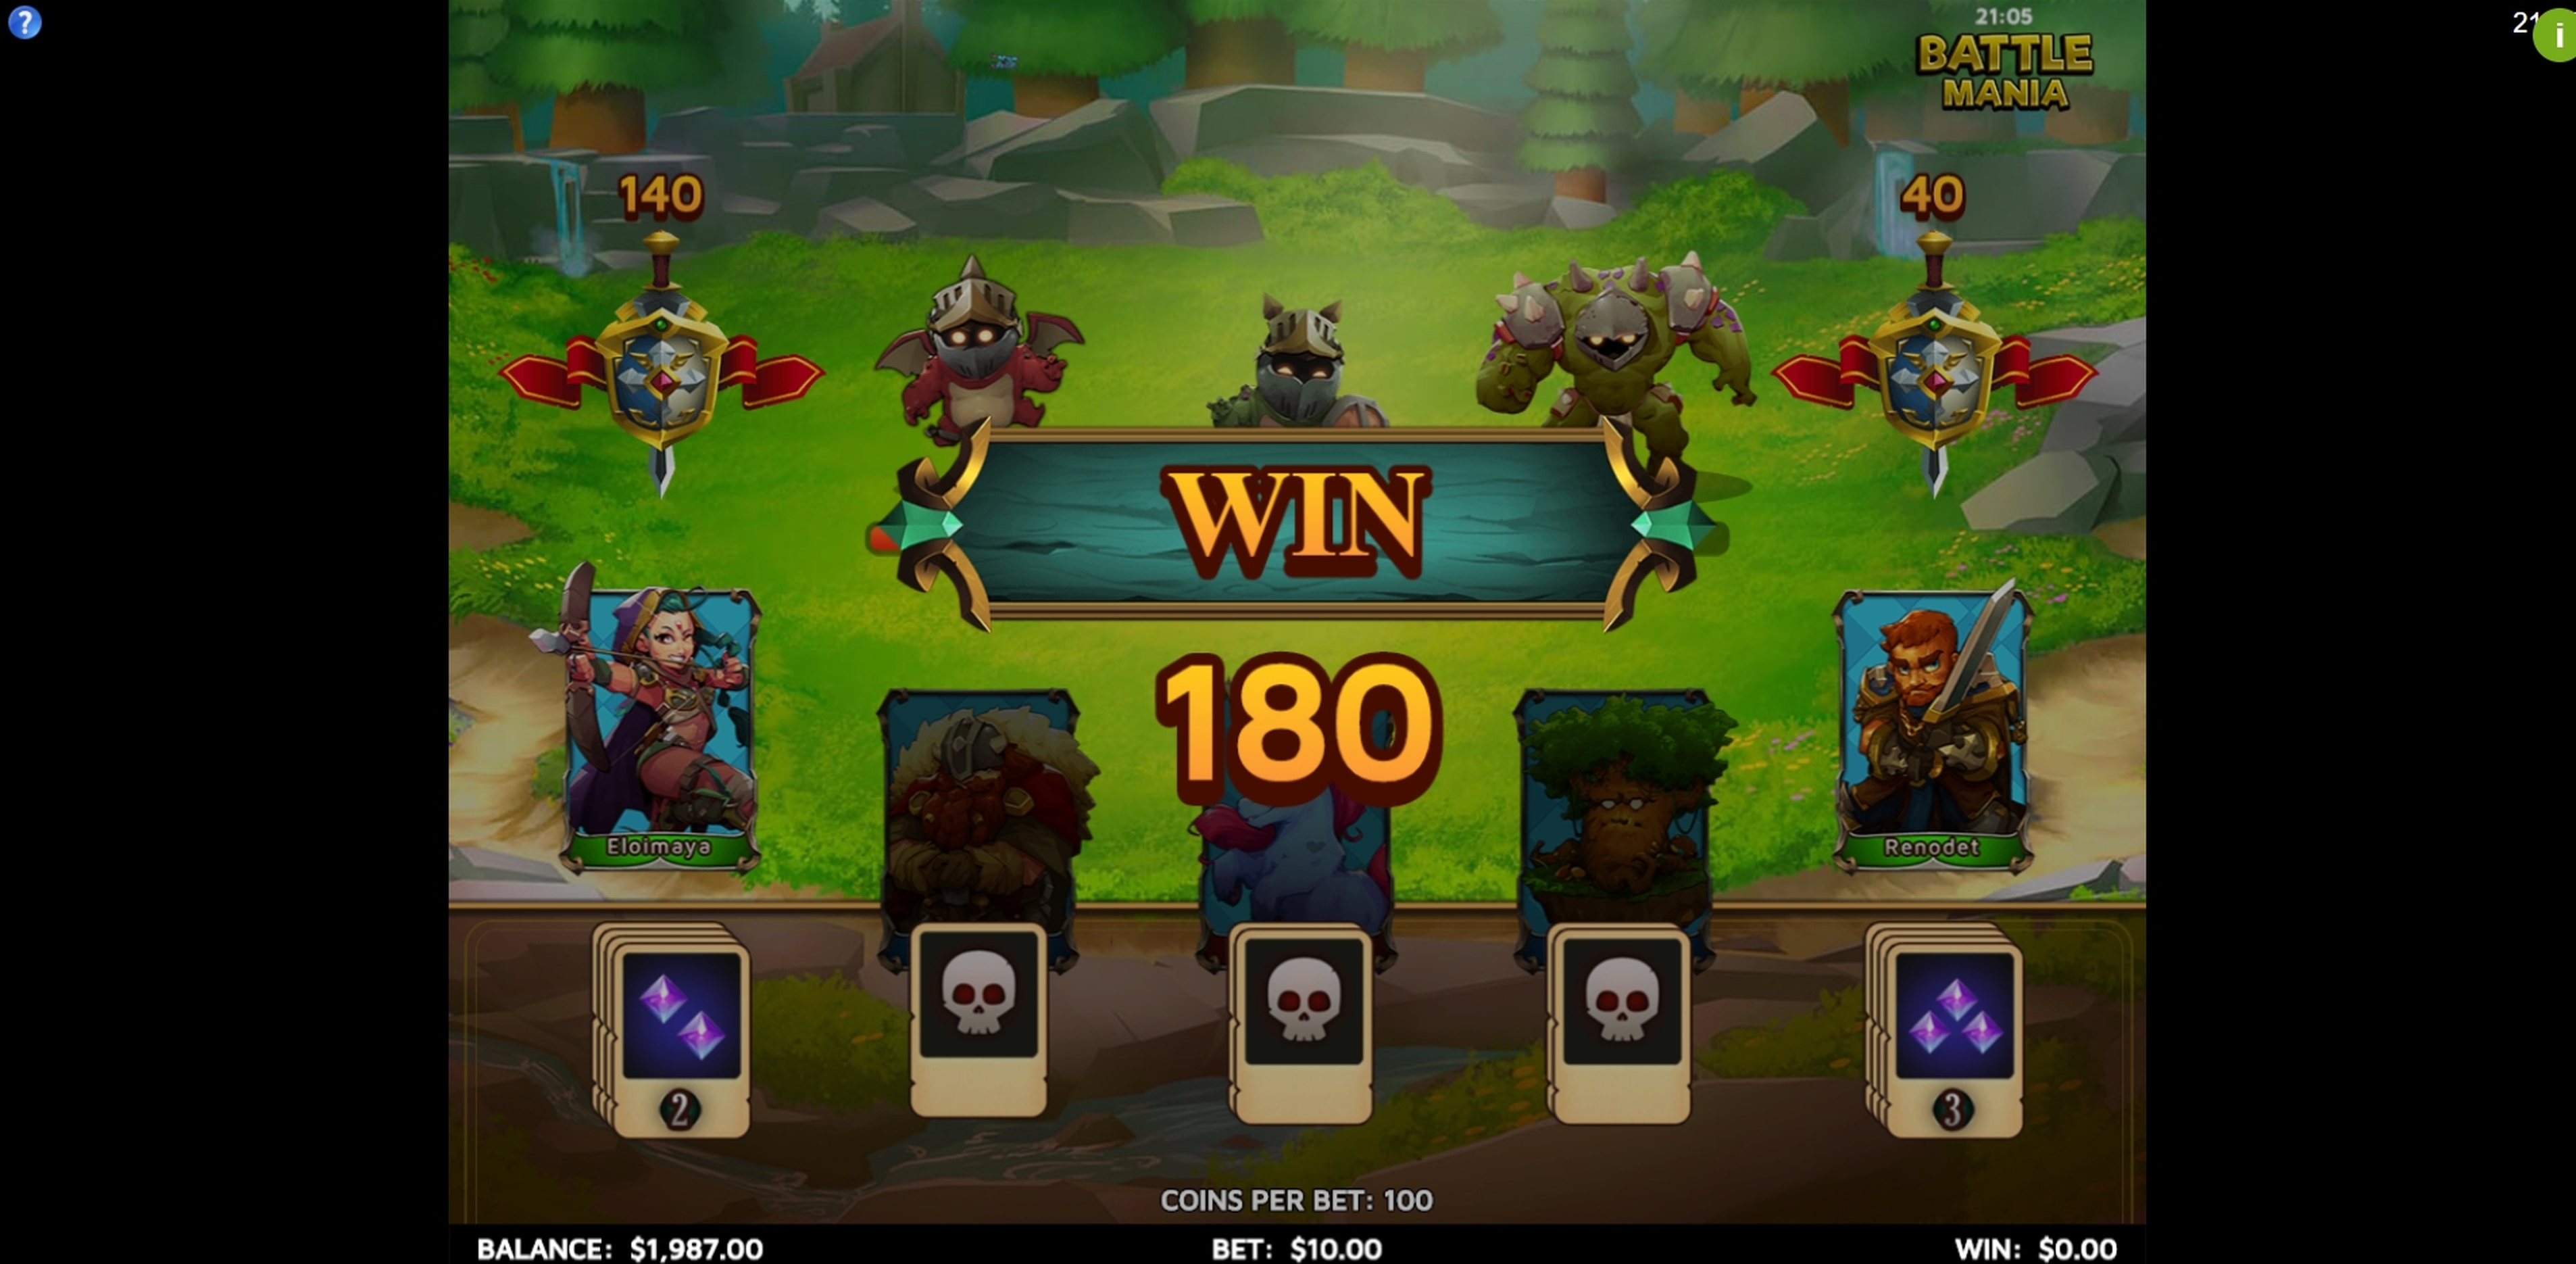 Win Money in Battle Mania Free Slot Game by Skillzzgaming